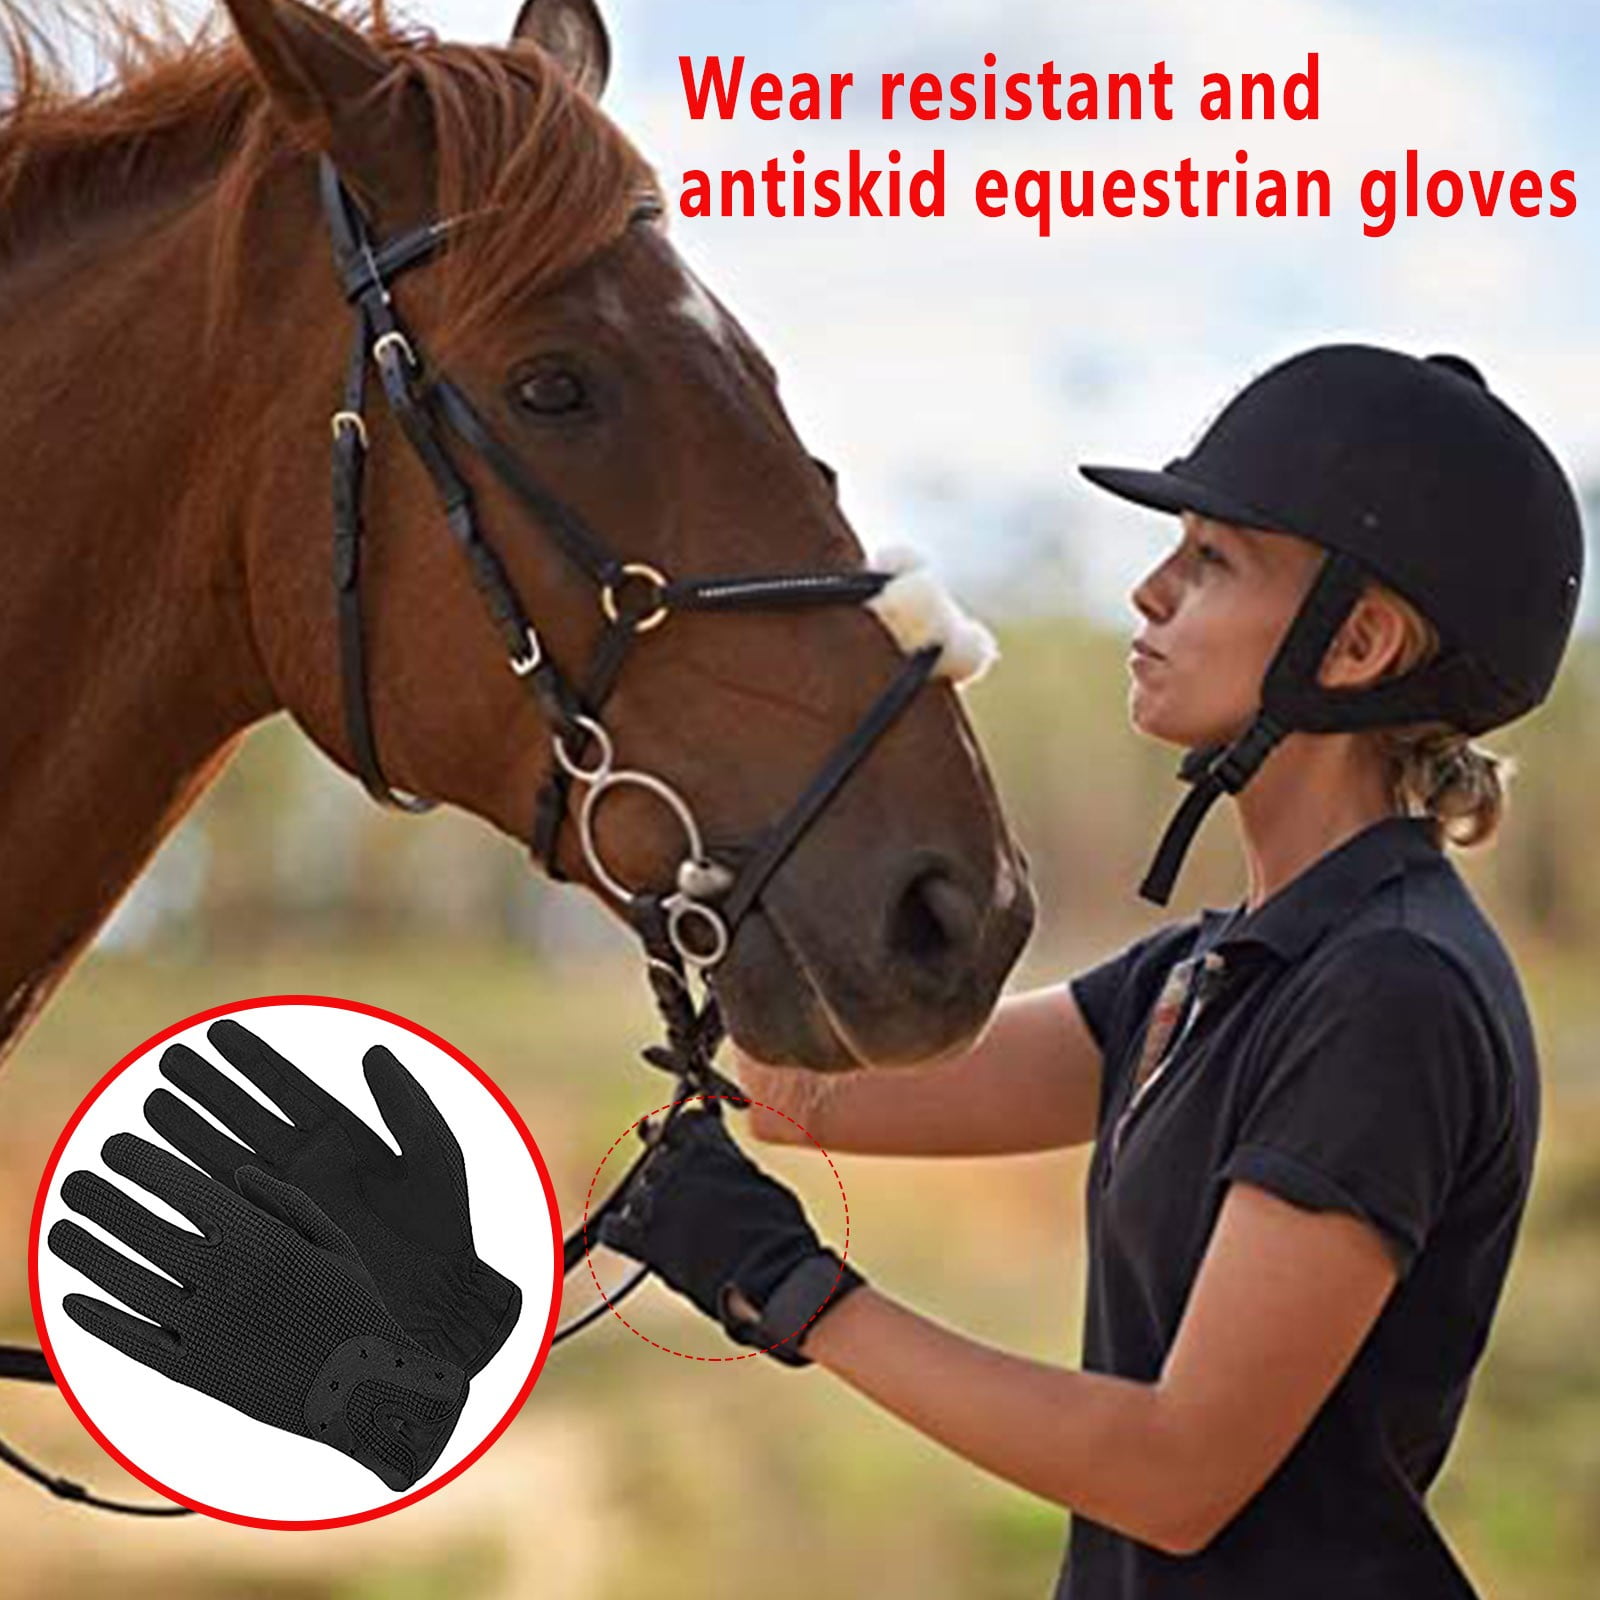 Ladies Horse Riding Womens Gloves Equestrian Real Leather & Cotton Premium Quality in TAN